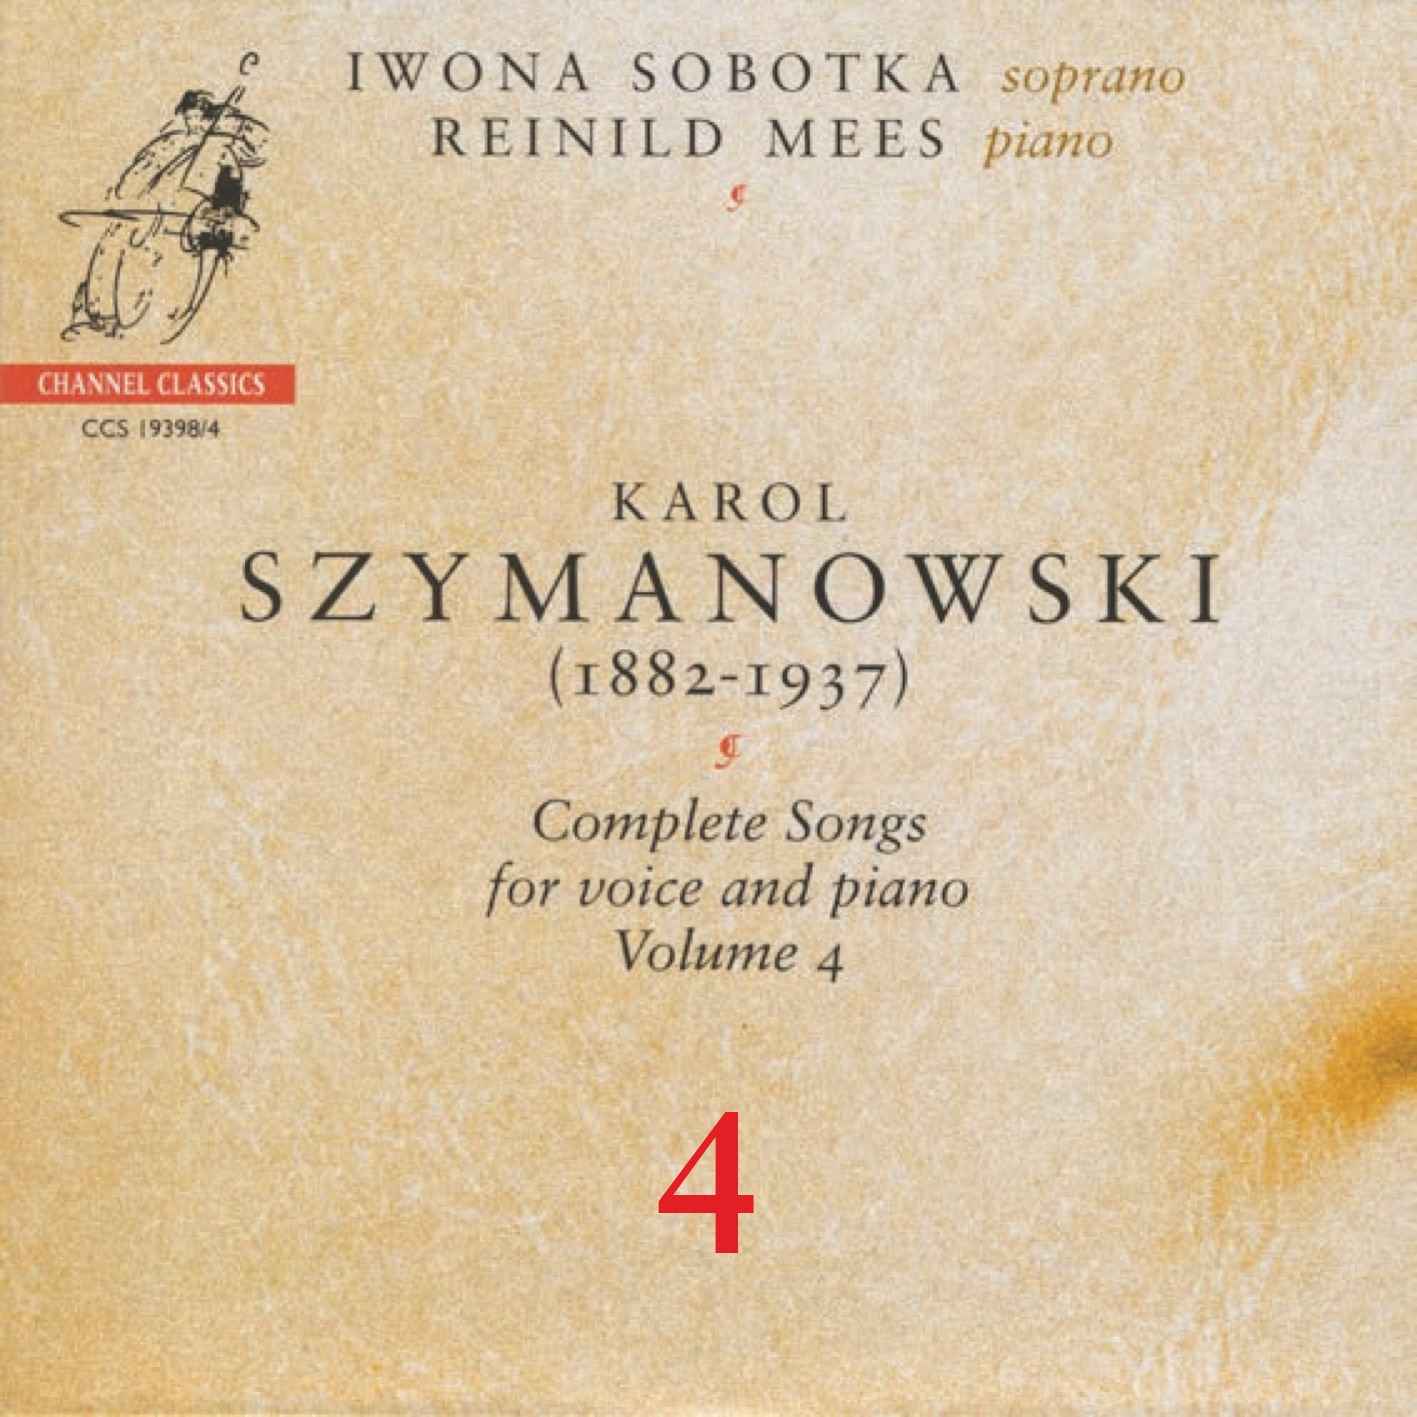 Iwona in Szymanowski: Complete Songs for Voice and Piano